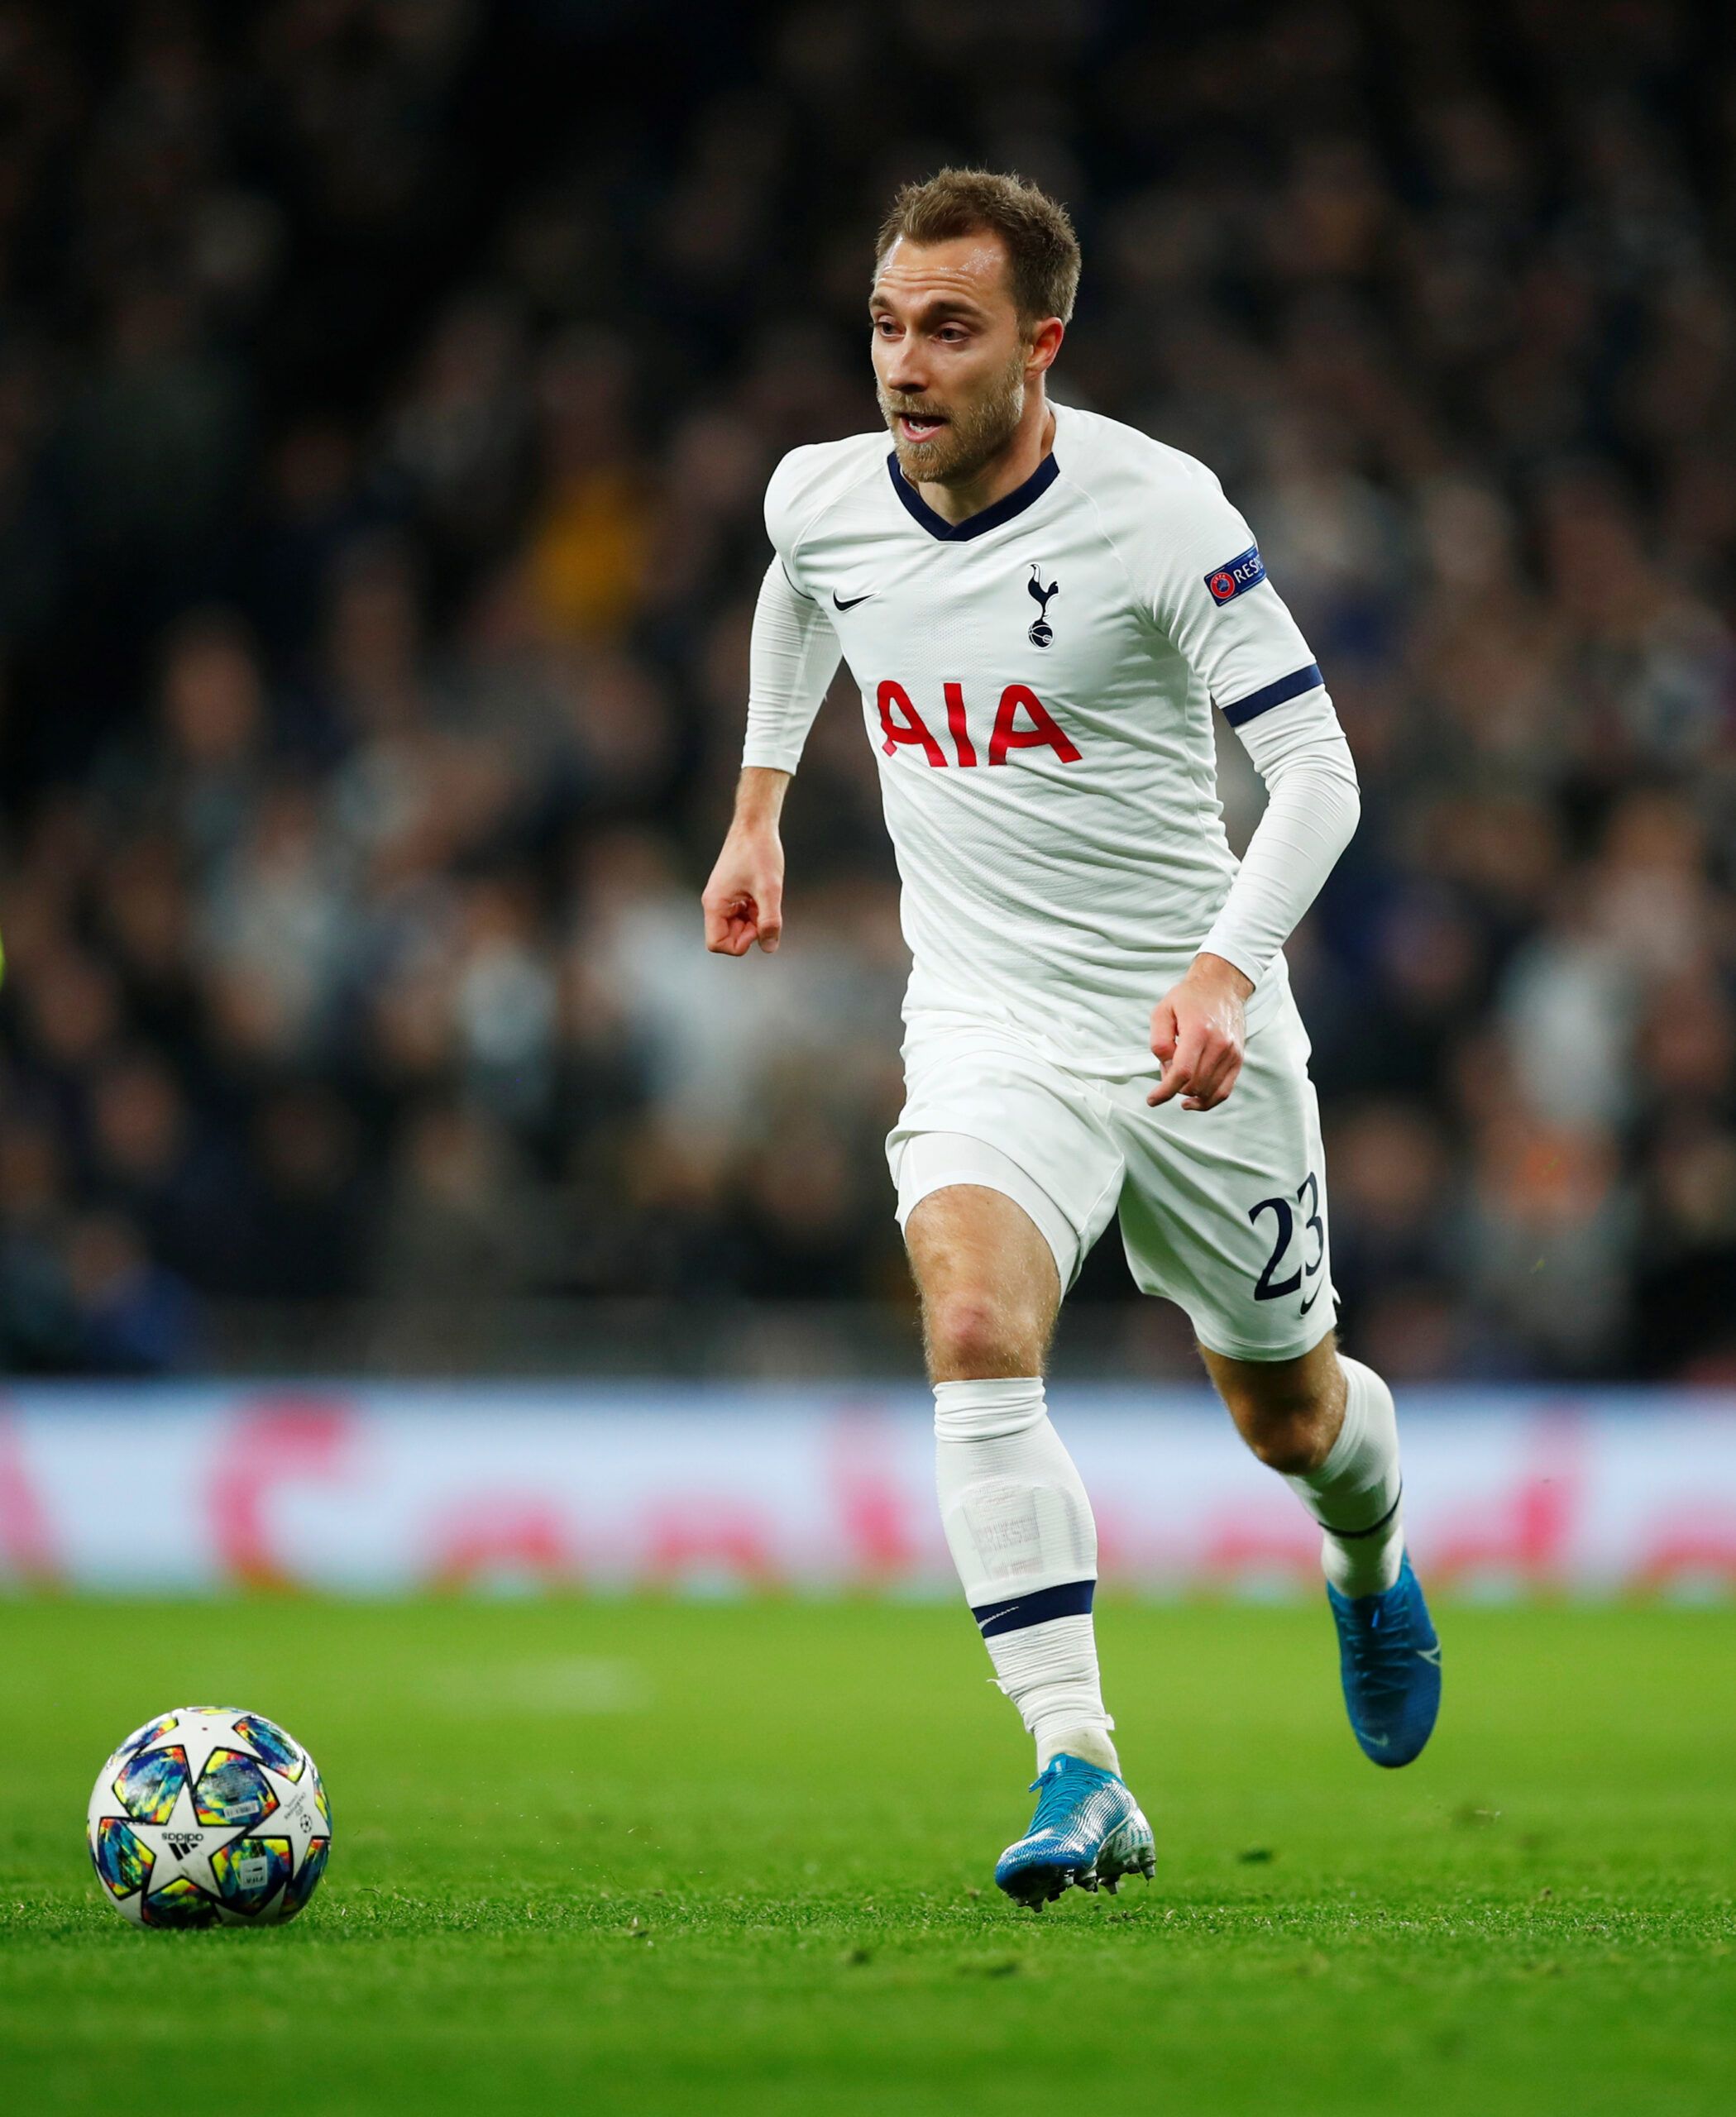 Eriksen chasing the ball in his Spurs days.